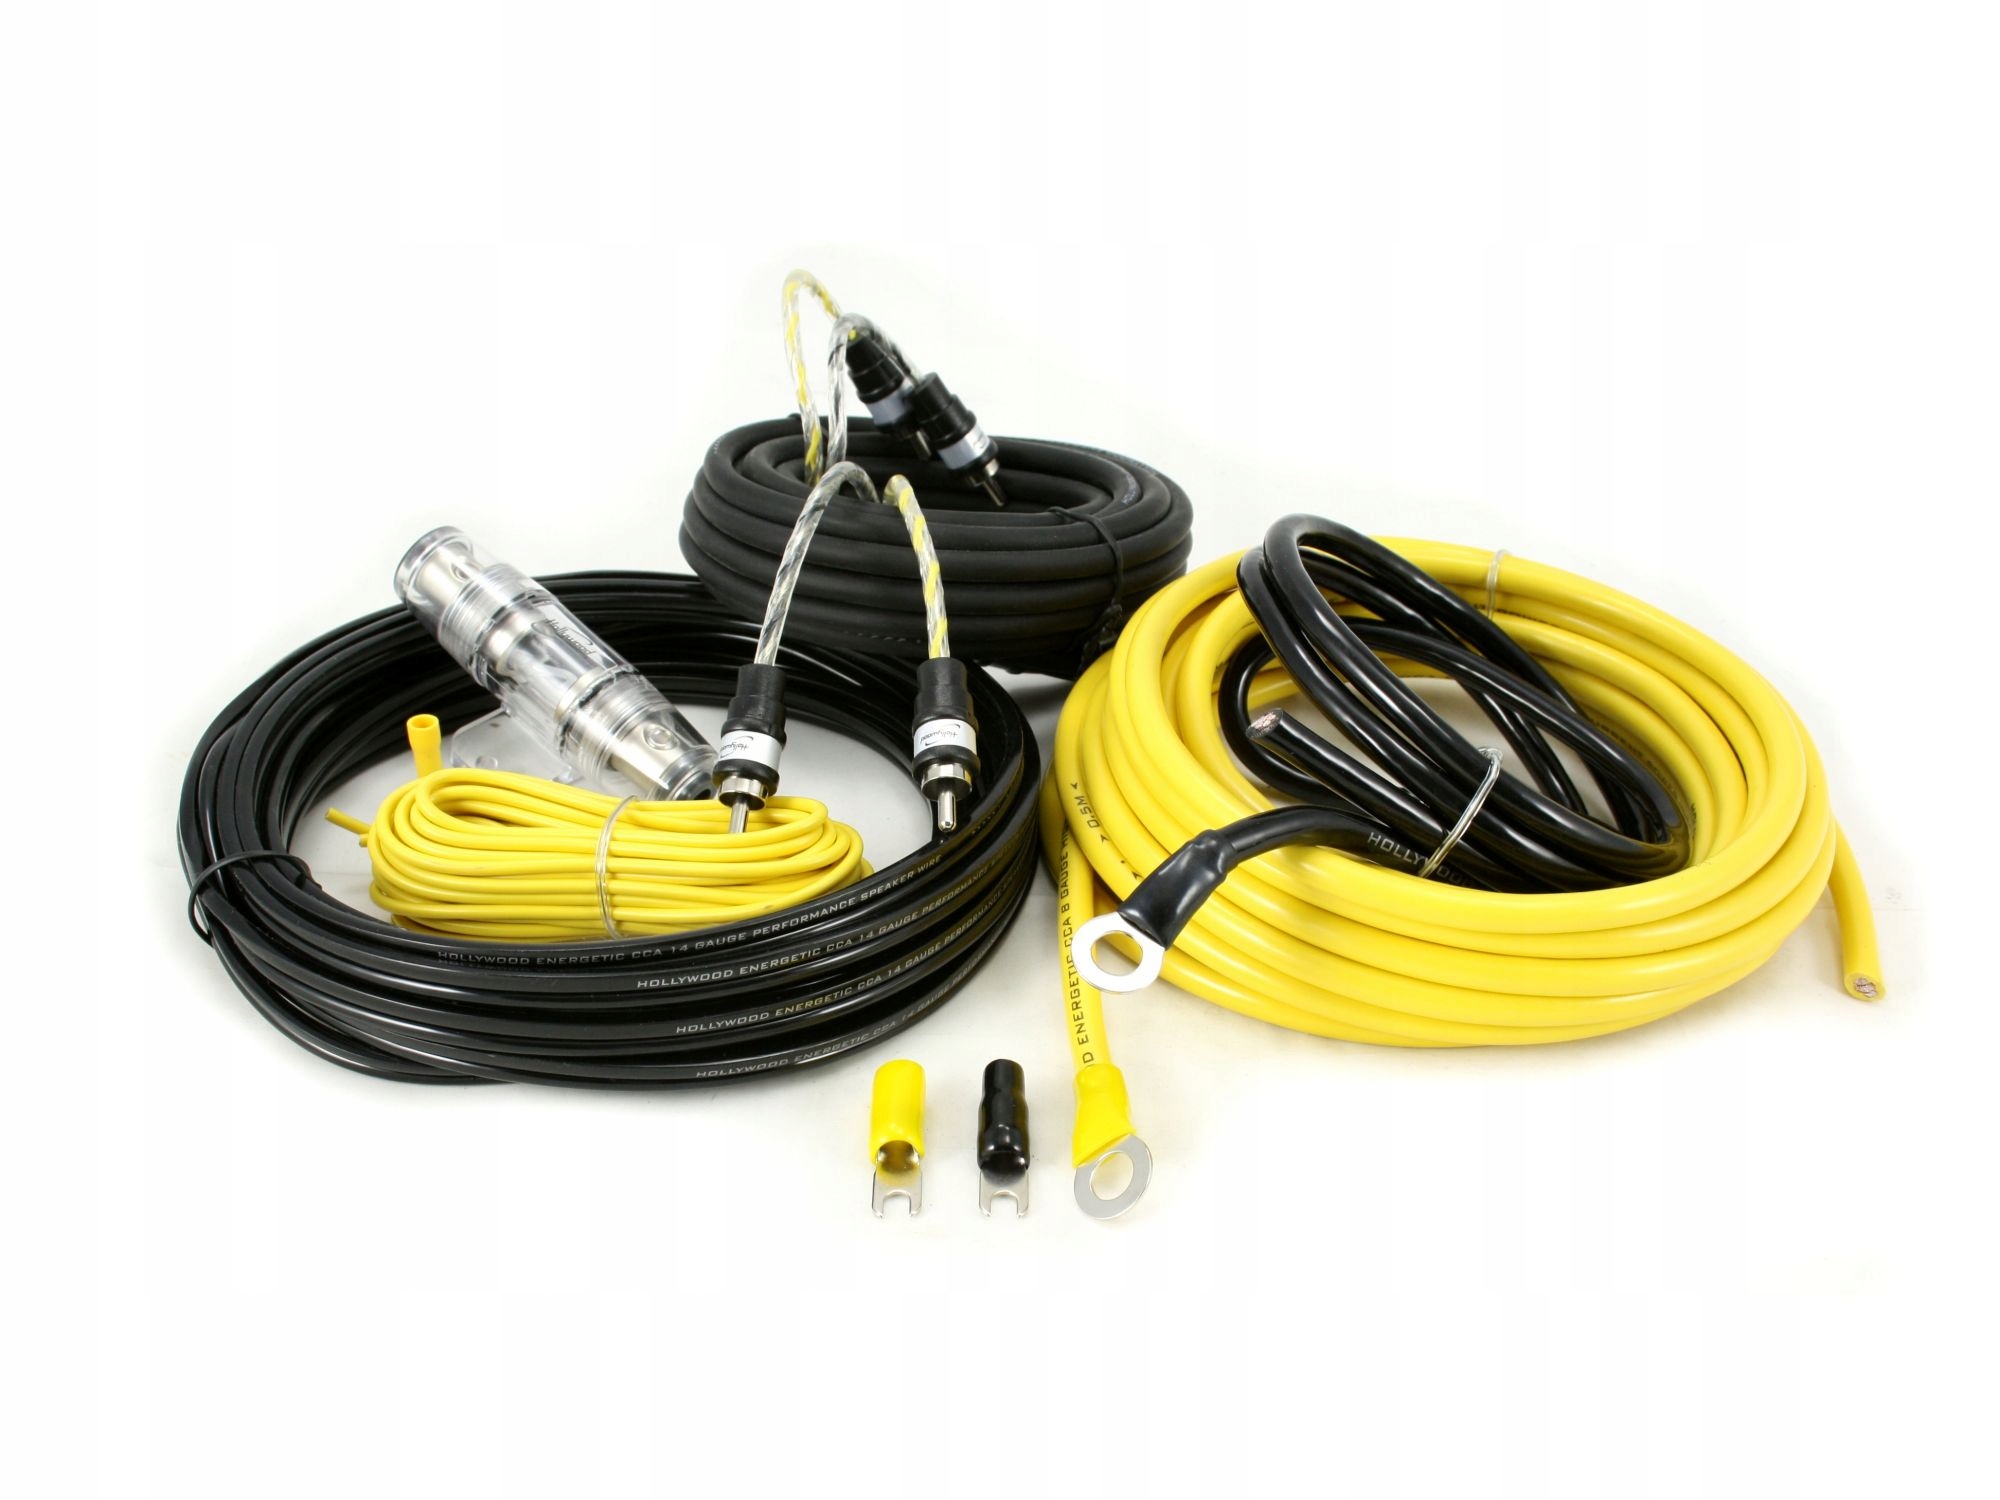 cable set for The Hollywood CCA-28 amplifier